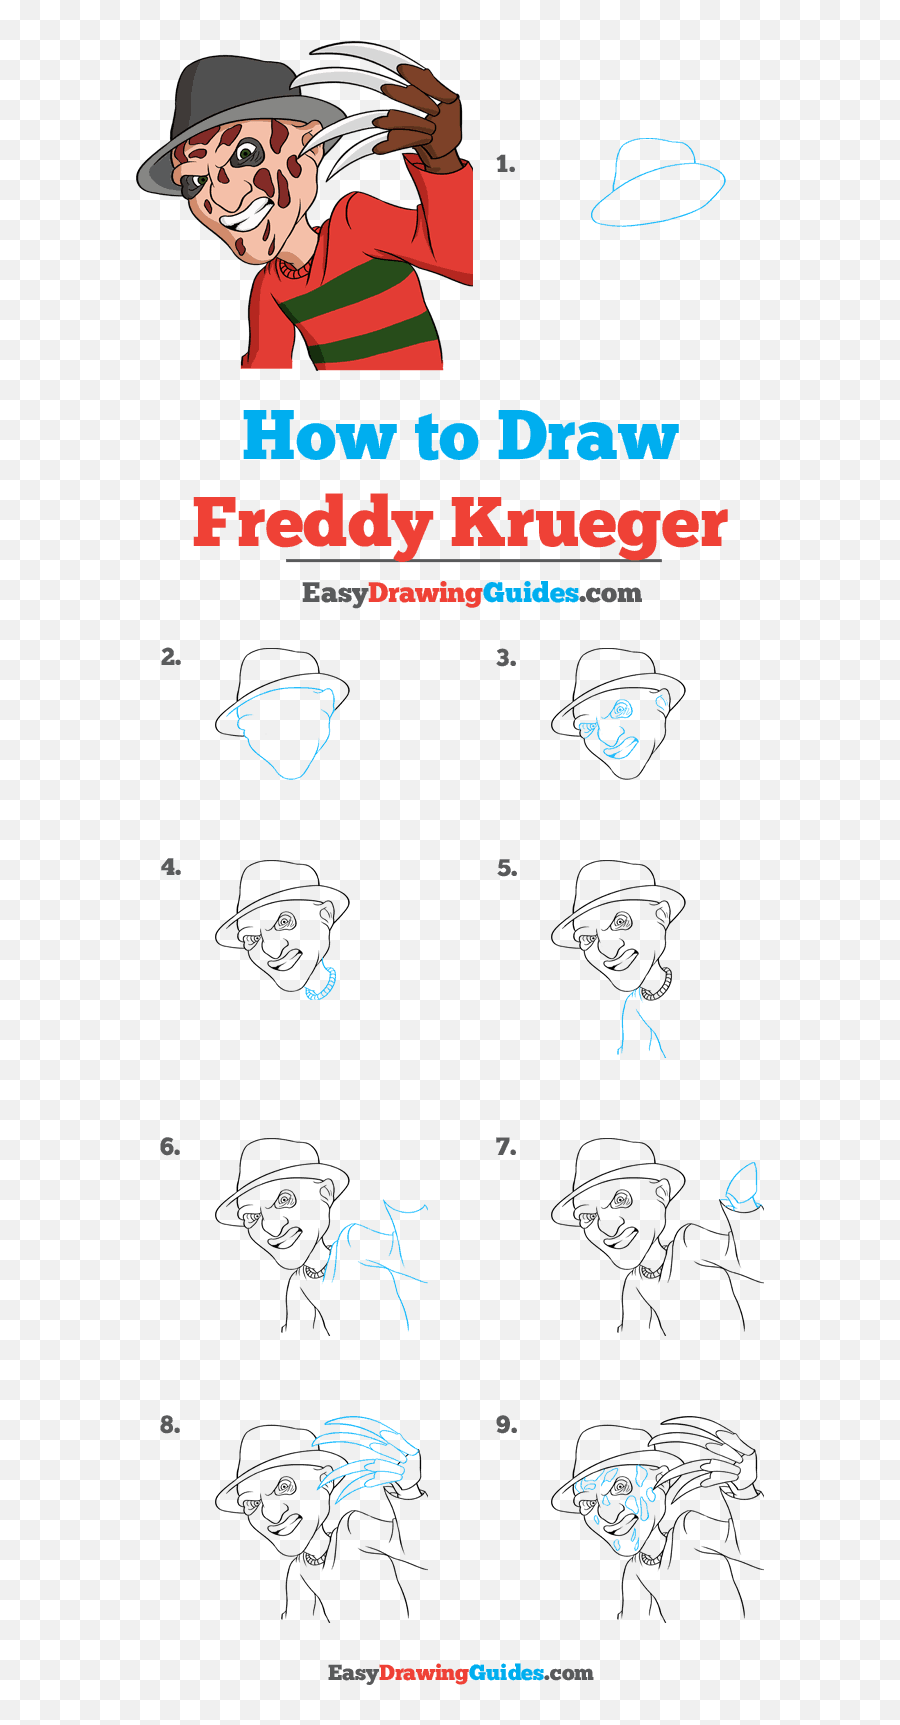 How To Draw Freddy Krueger From Nightmare - Draw A Christmas Stocking Png,Nightmare On Elm Street Logo